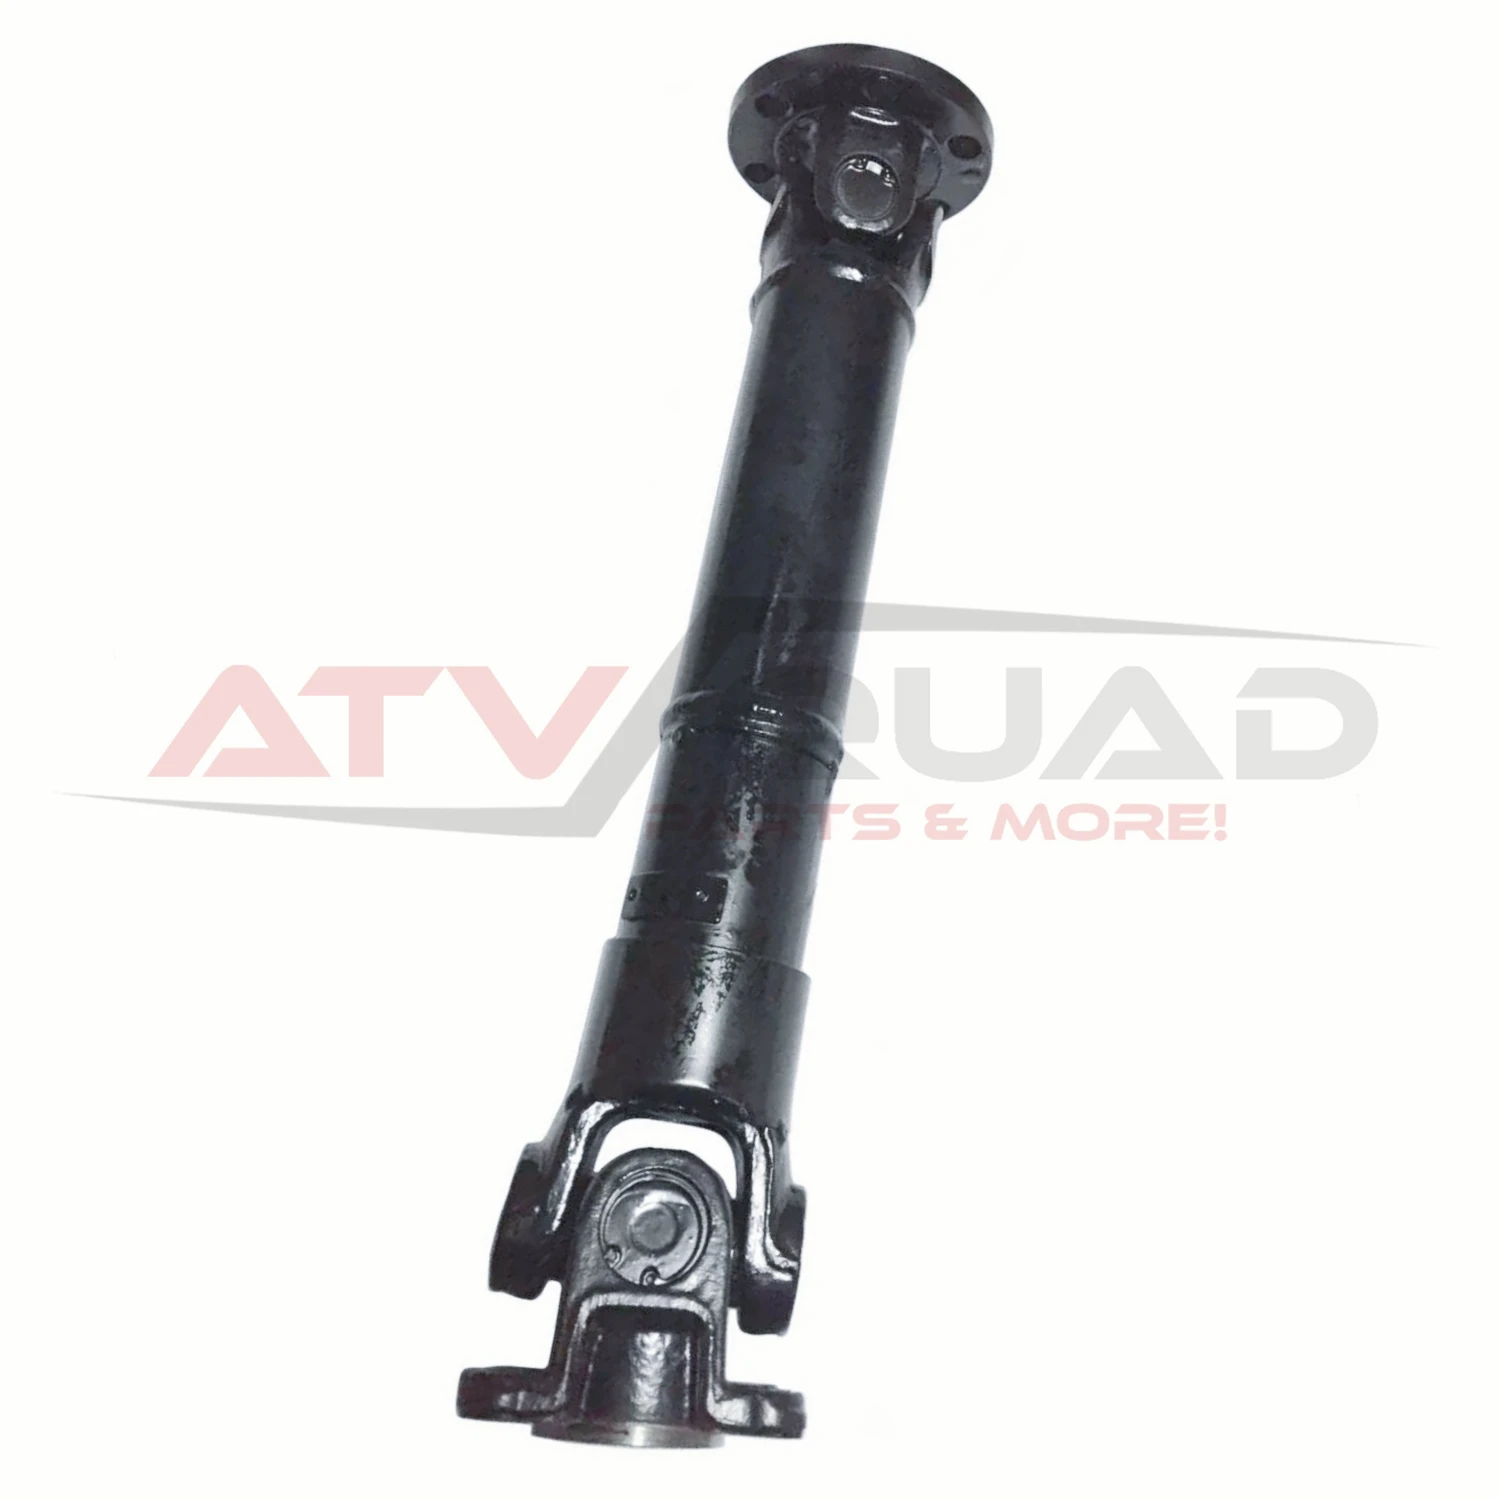 Rear Drive Shaft for CFmoto 500 X5 CF188 600 X6 625 CF196 Gladiator RX510 RX530 Goes 520 525 625i Max 901-30.01.00A 901A-300100